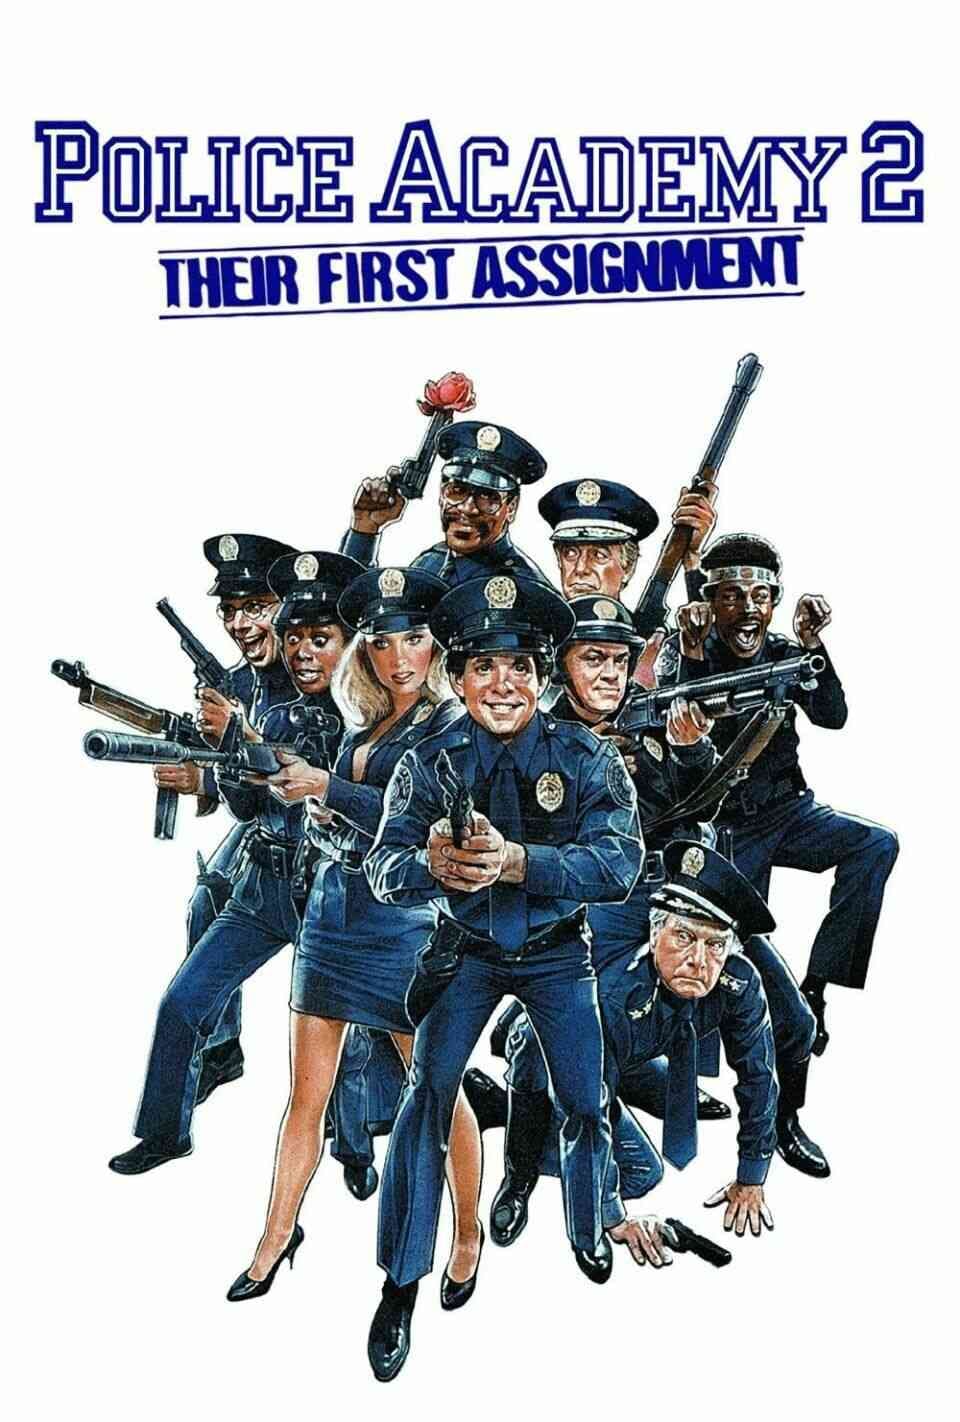 Read Their First Assignment screenplay (poster)